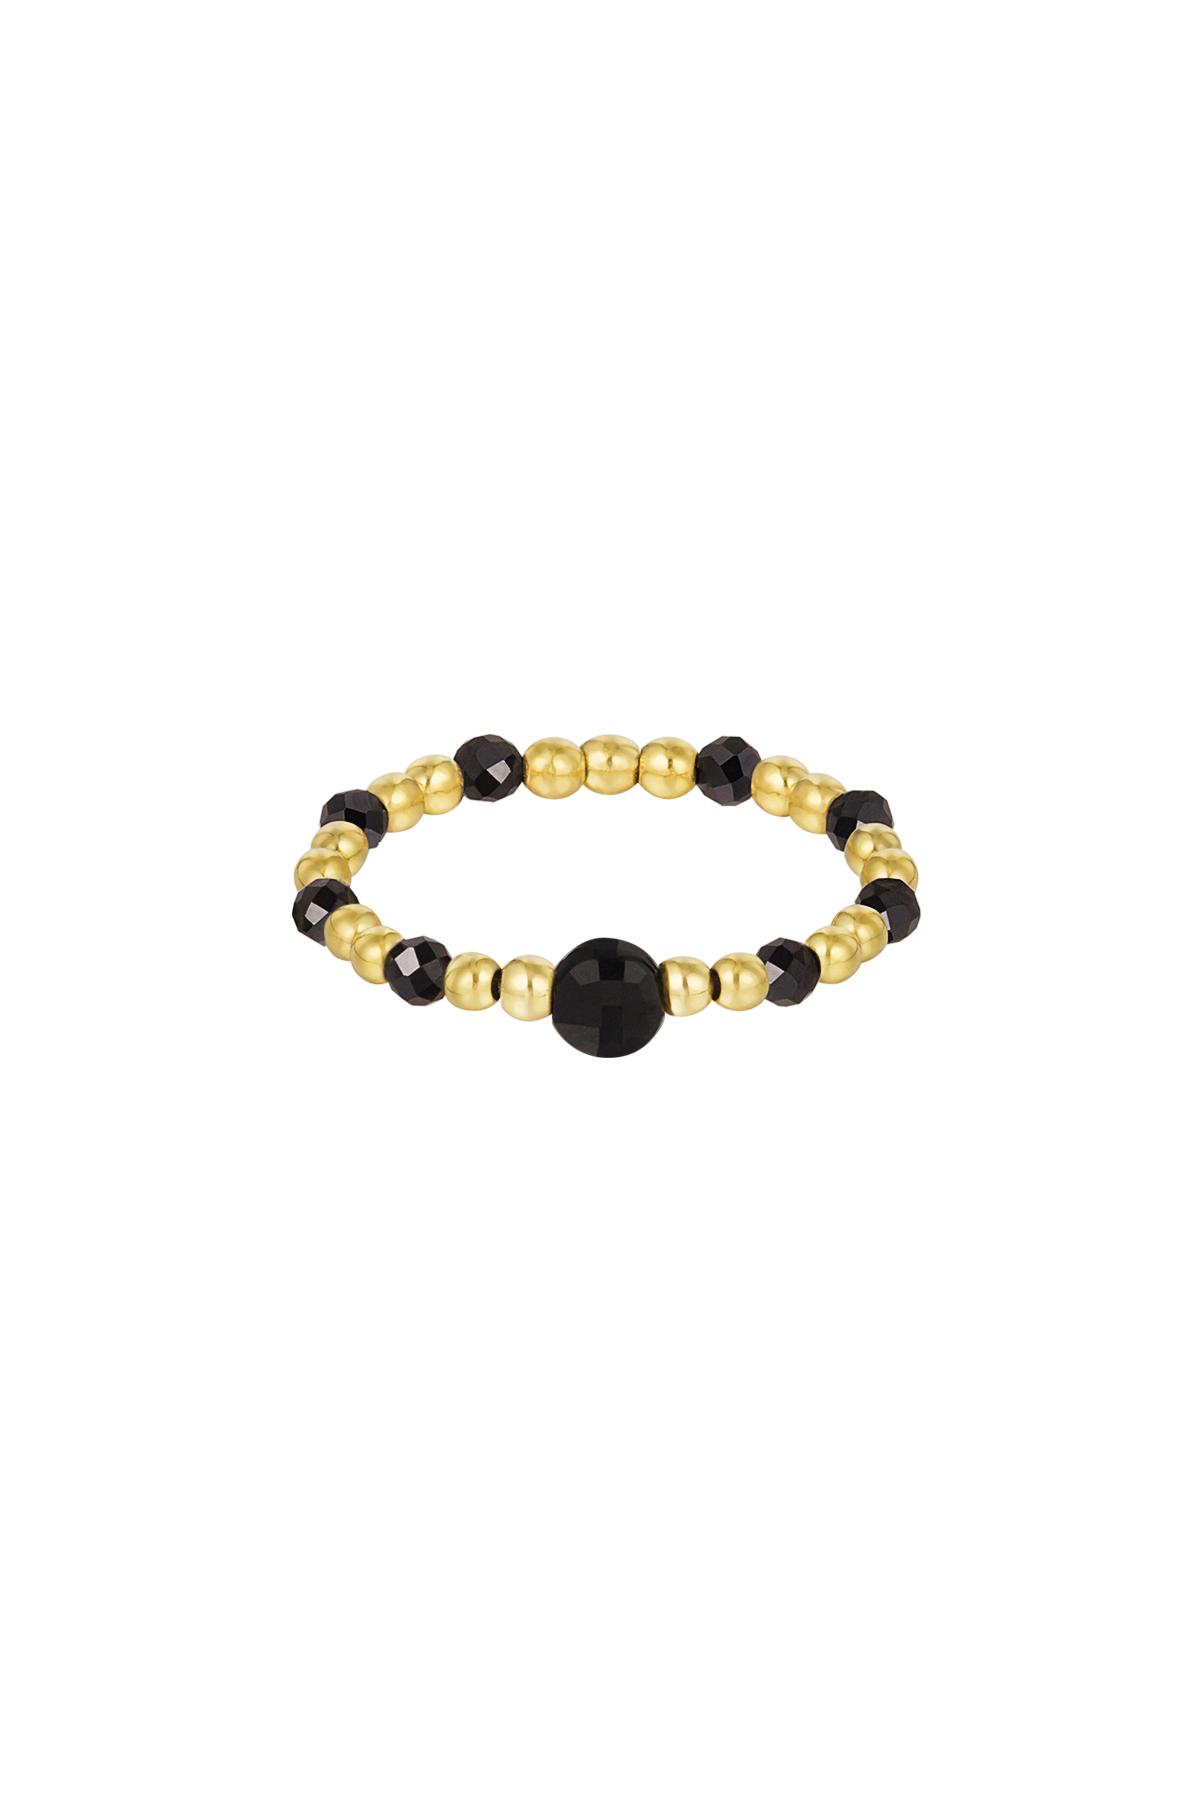 Elastic bead ring - black - natural stone collection Black & Gold One size h5 